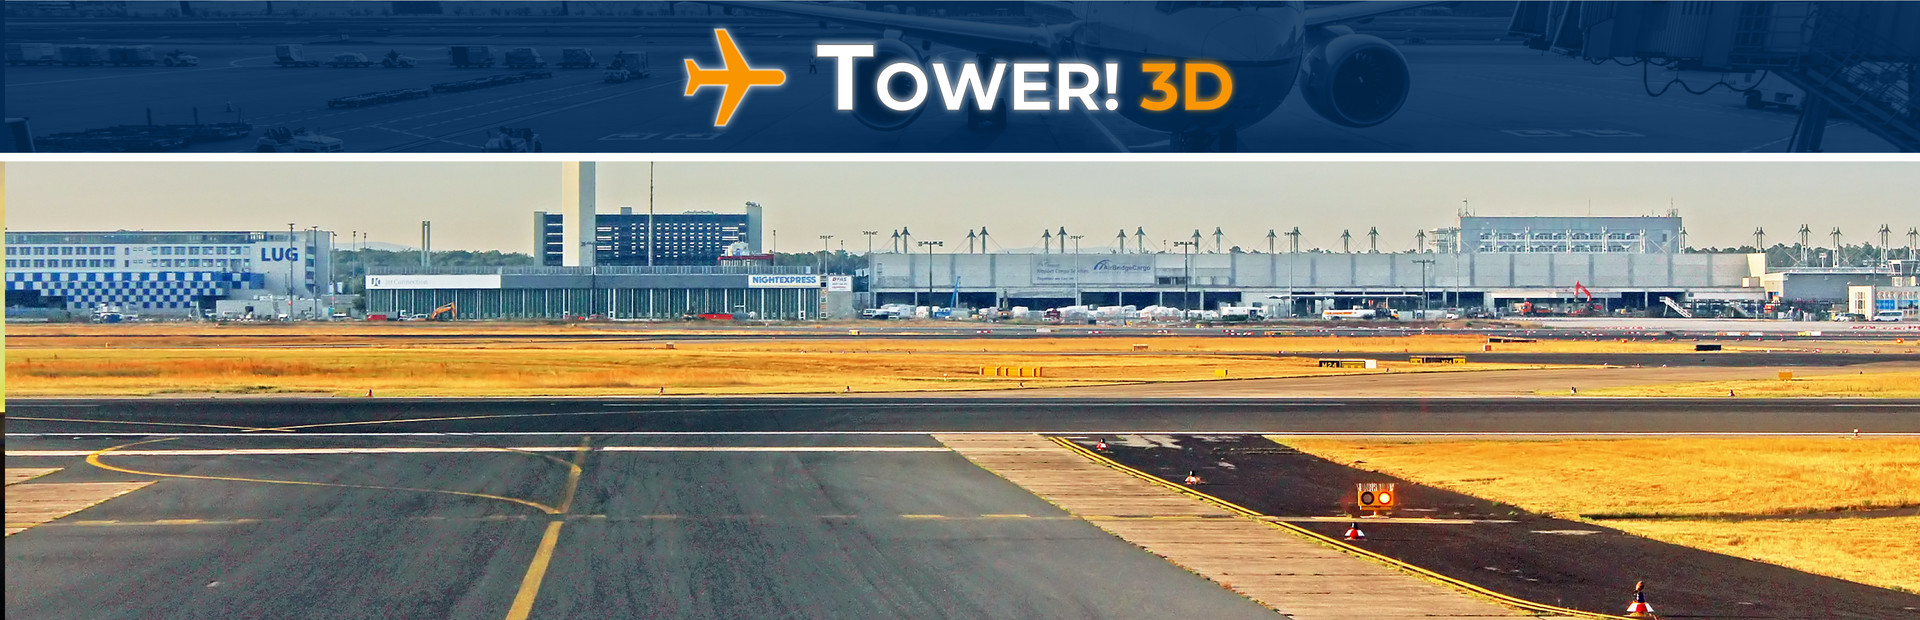 Tower! 3D cover image